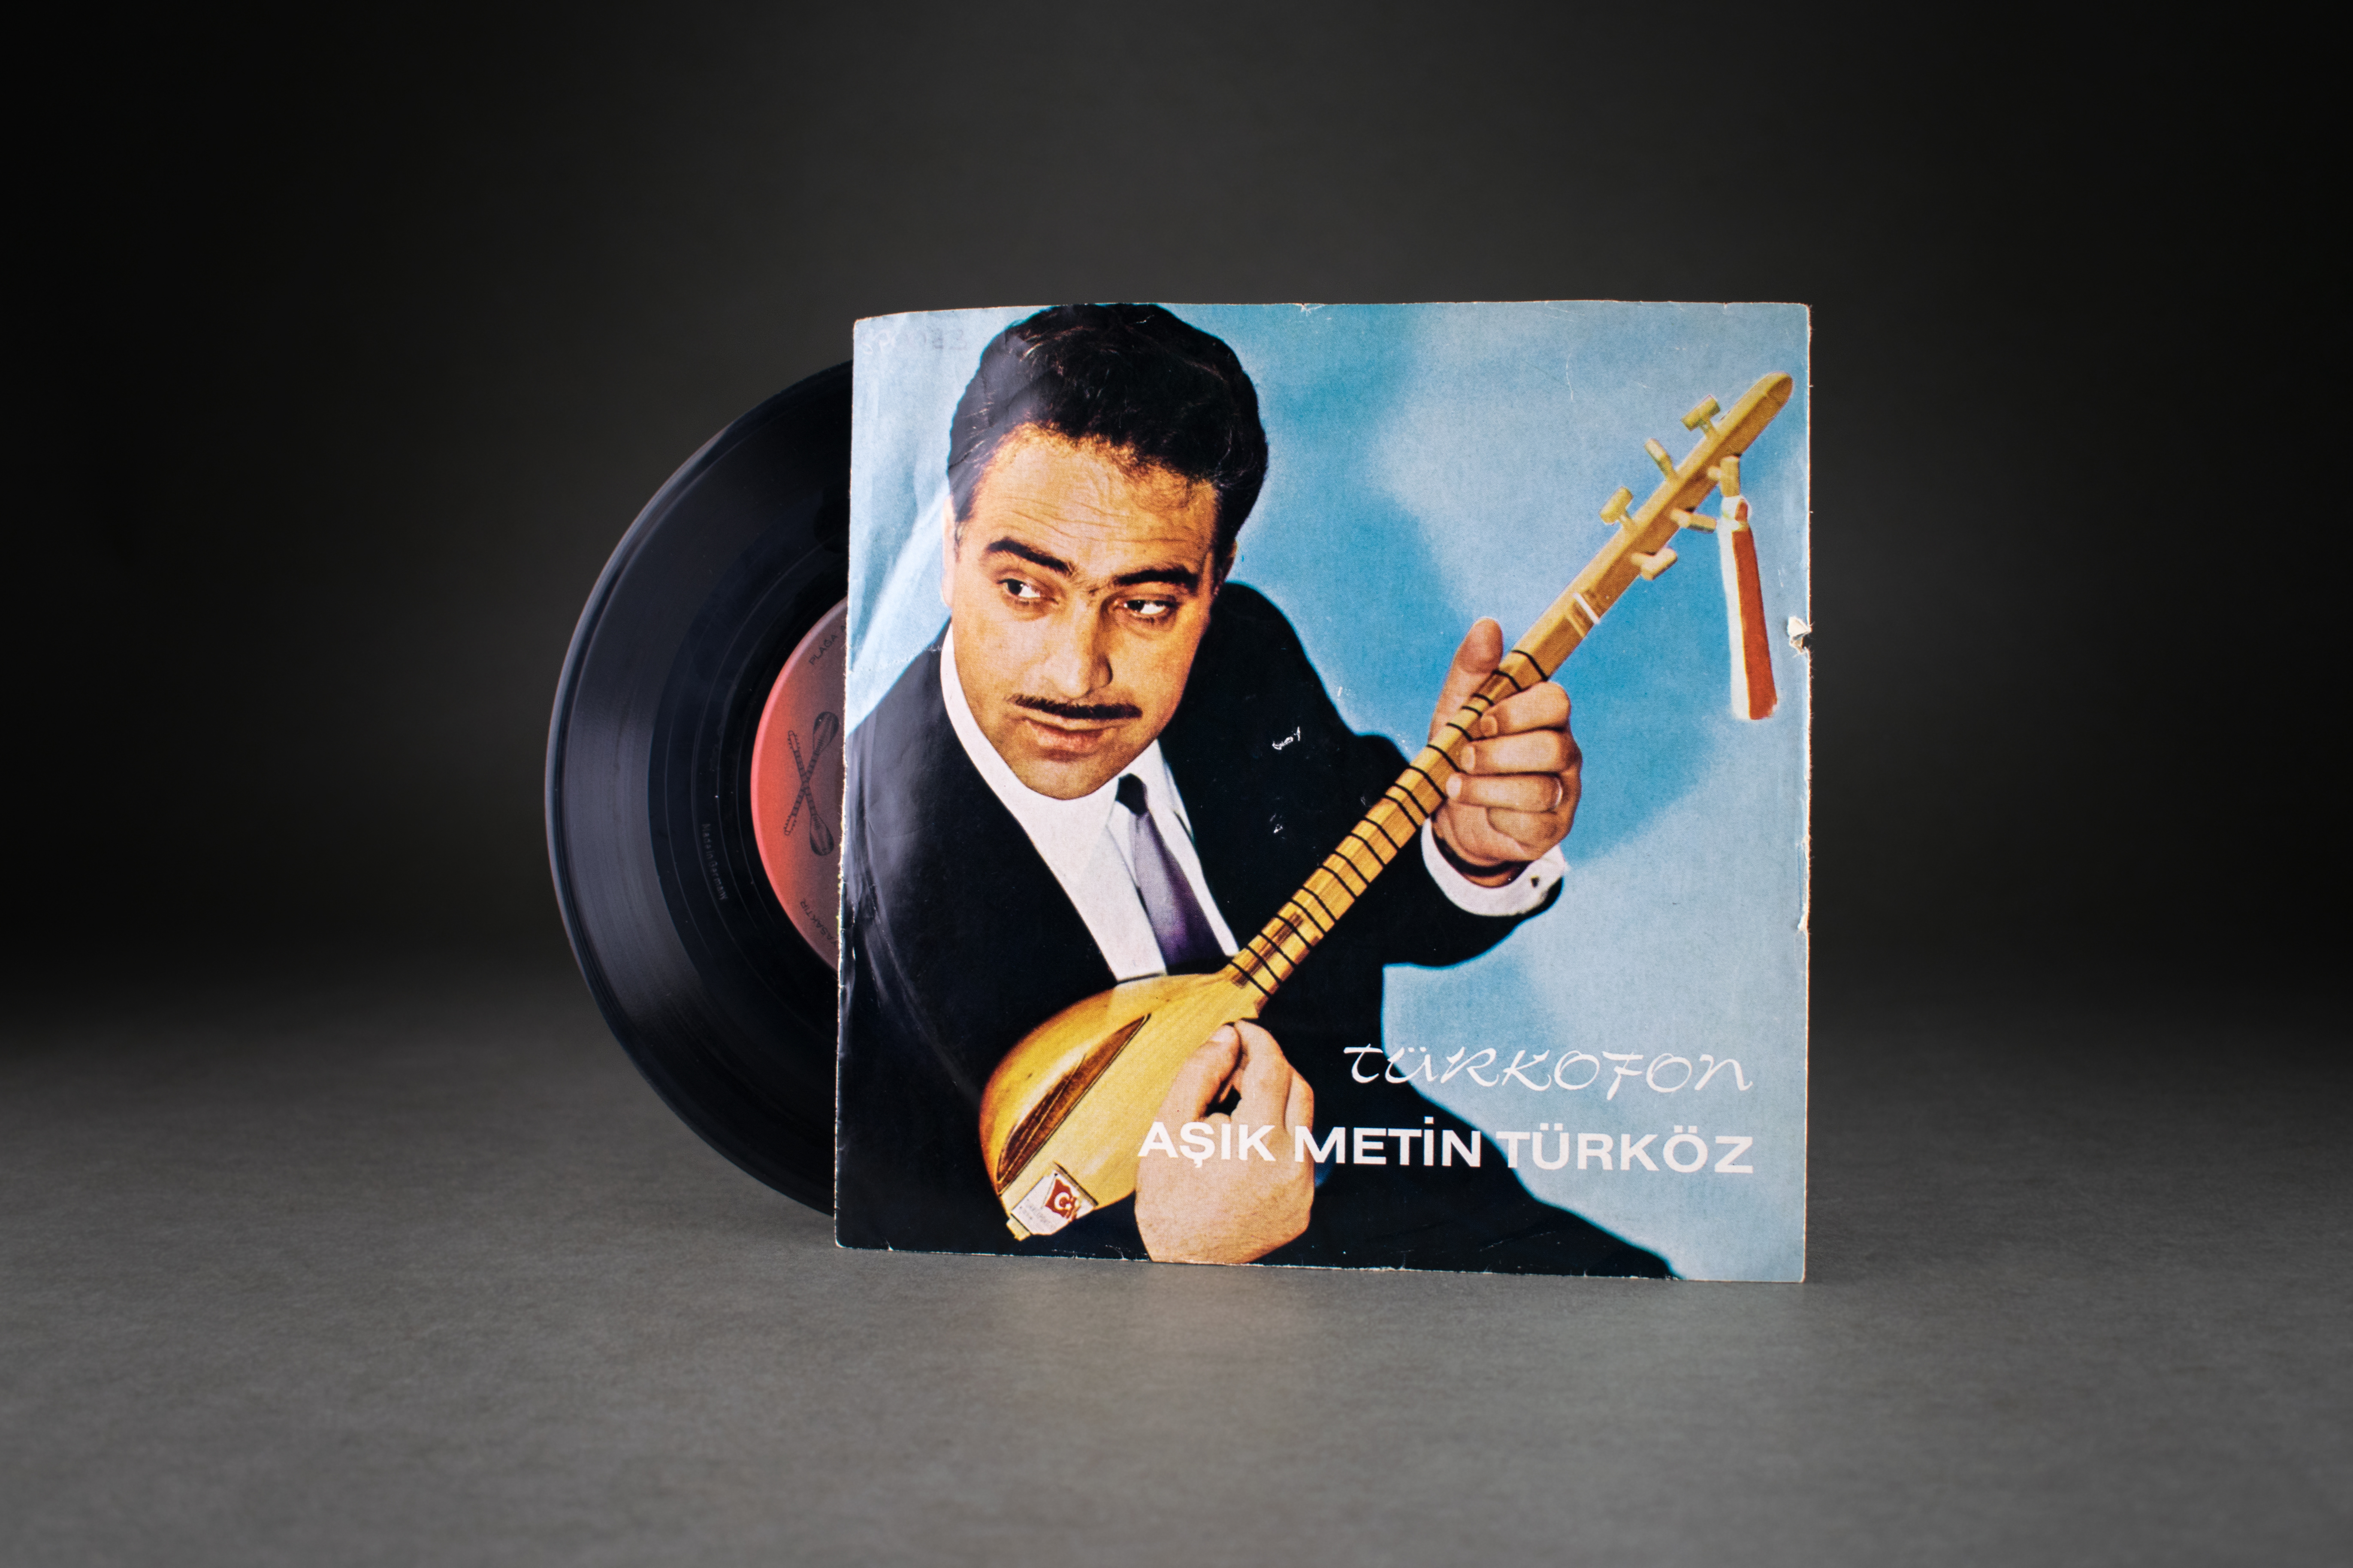 Record “Kabahat Tercümanda” by Metin Türköz, 1970s, turophone. DOMiD Archive, Cologne, BT 0204,0001 Metin Türköz was one of the best-known singers of so-called “guest worker music”. His songs reported on the everyday life of migrant workers, such as the song "Guten Morgen Mayistero". Many of them were socially critical, as the title "Gastarbayter Raus" makes clear.